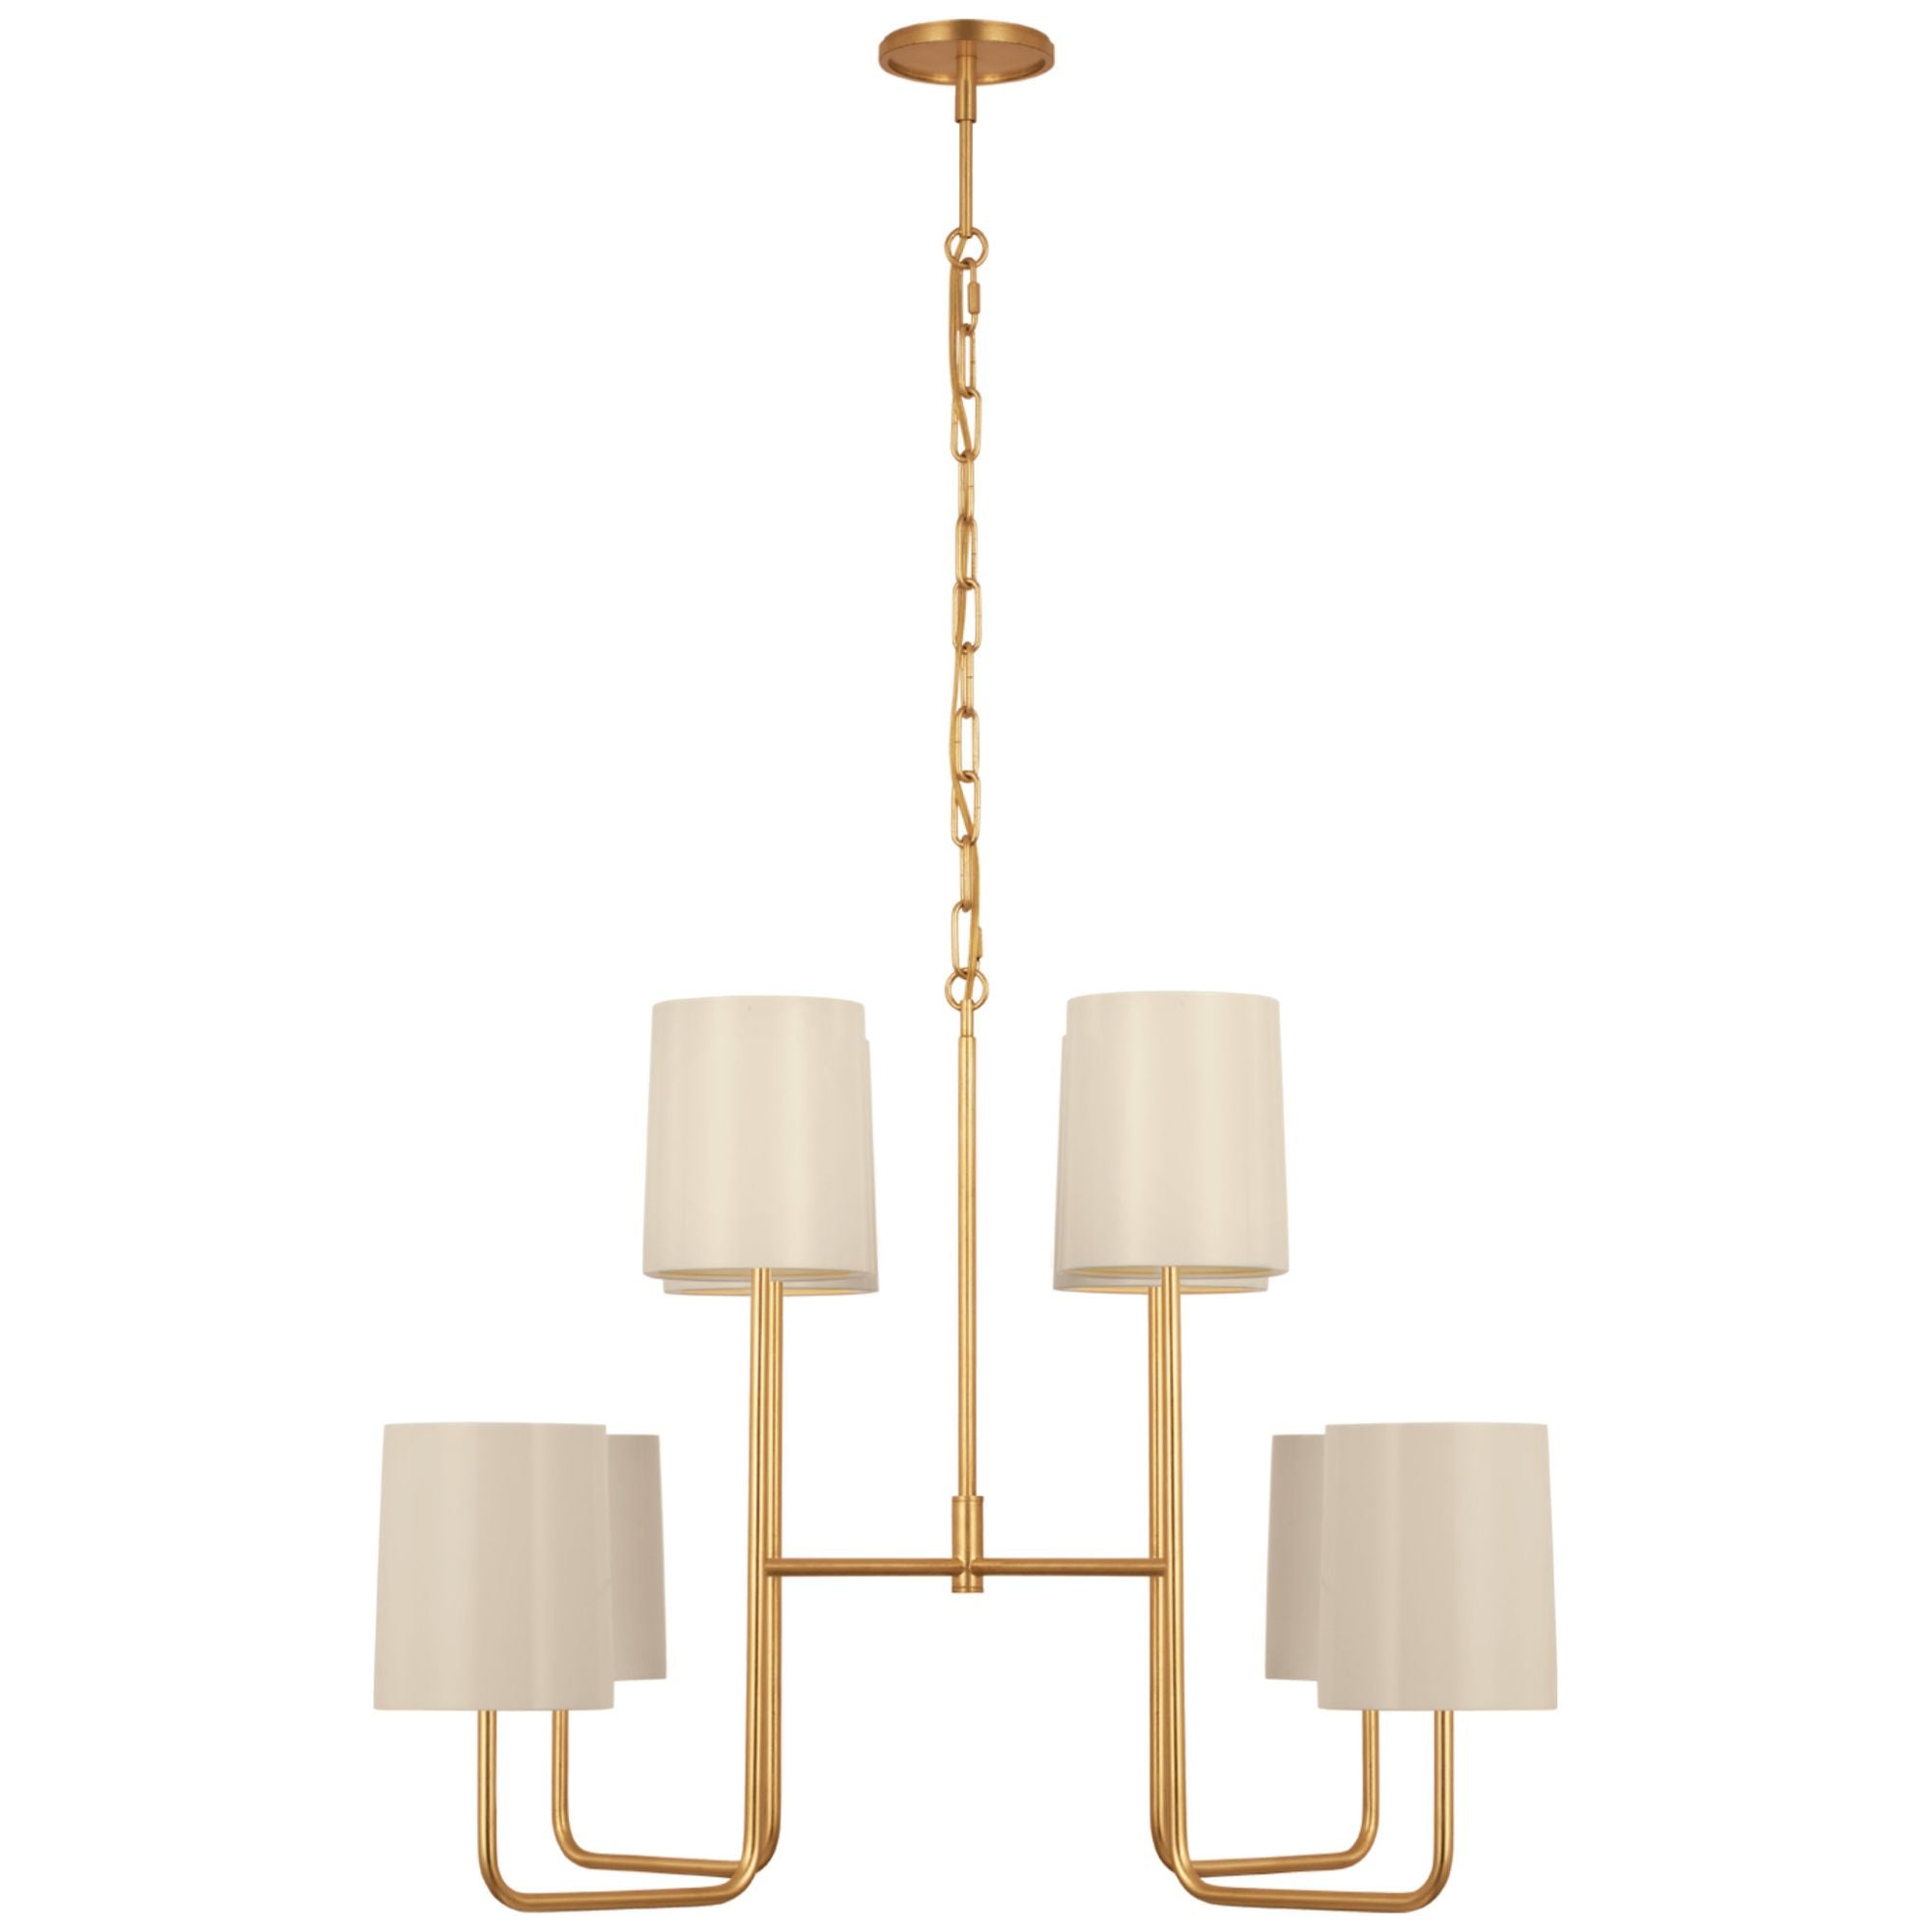 Barbara Barry Go Lightly Extra Large Two Tier Chandelier in Gild with China White Shades